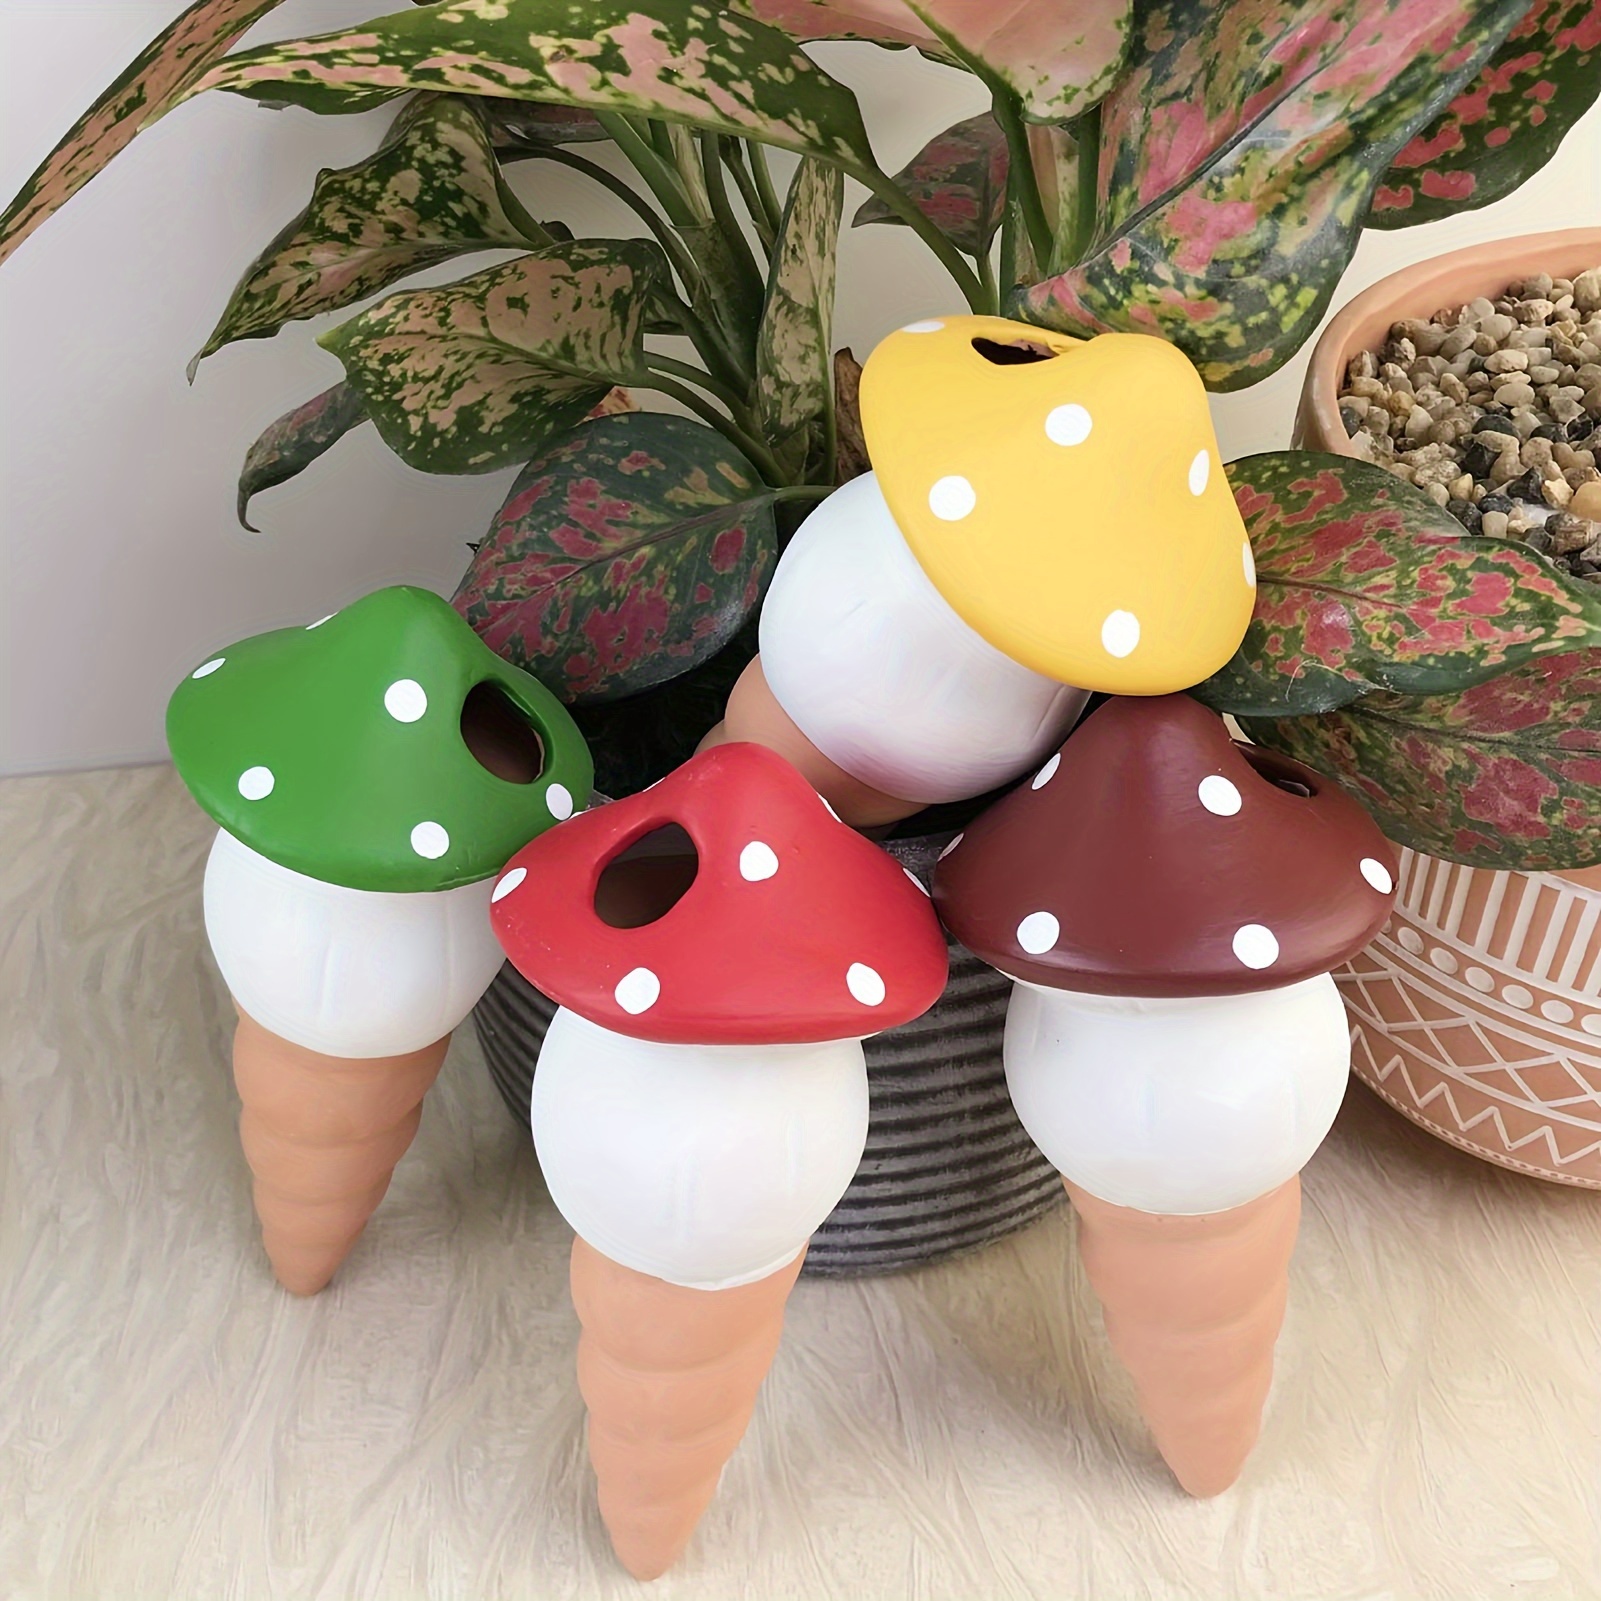 

4pcs Mushroom Plant Self Watering Spikes Ceramic Water Bulbs Garden Water Device For Plant Flower Indoor Outdoor